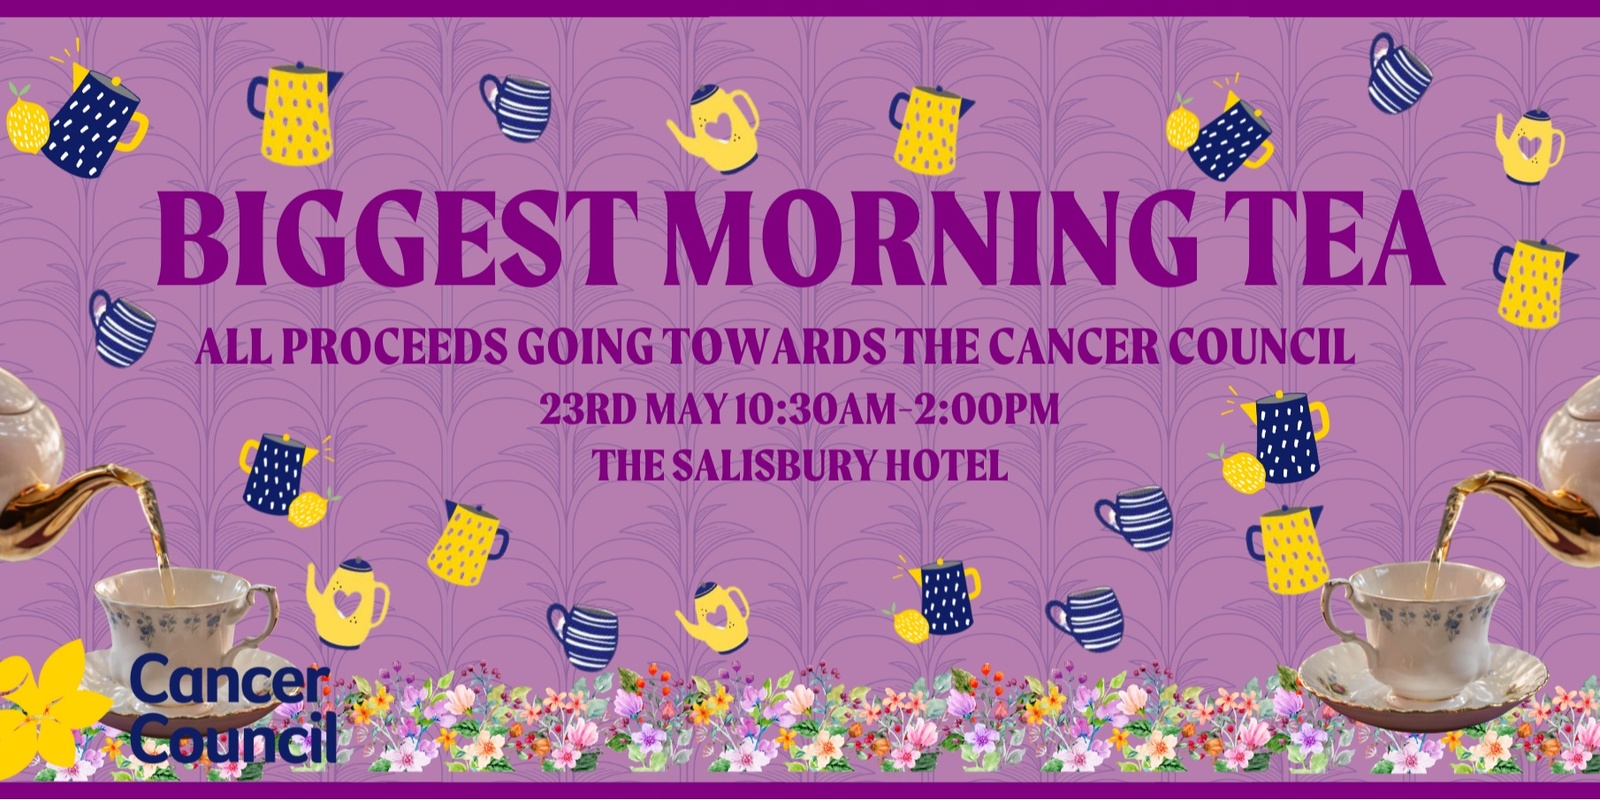 Banner image for The Cancer Council Biggest Morning Tea at The Salisbury Hotel